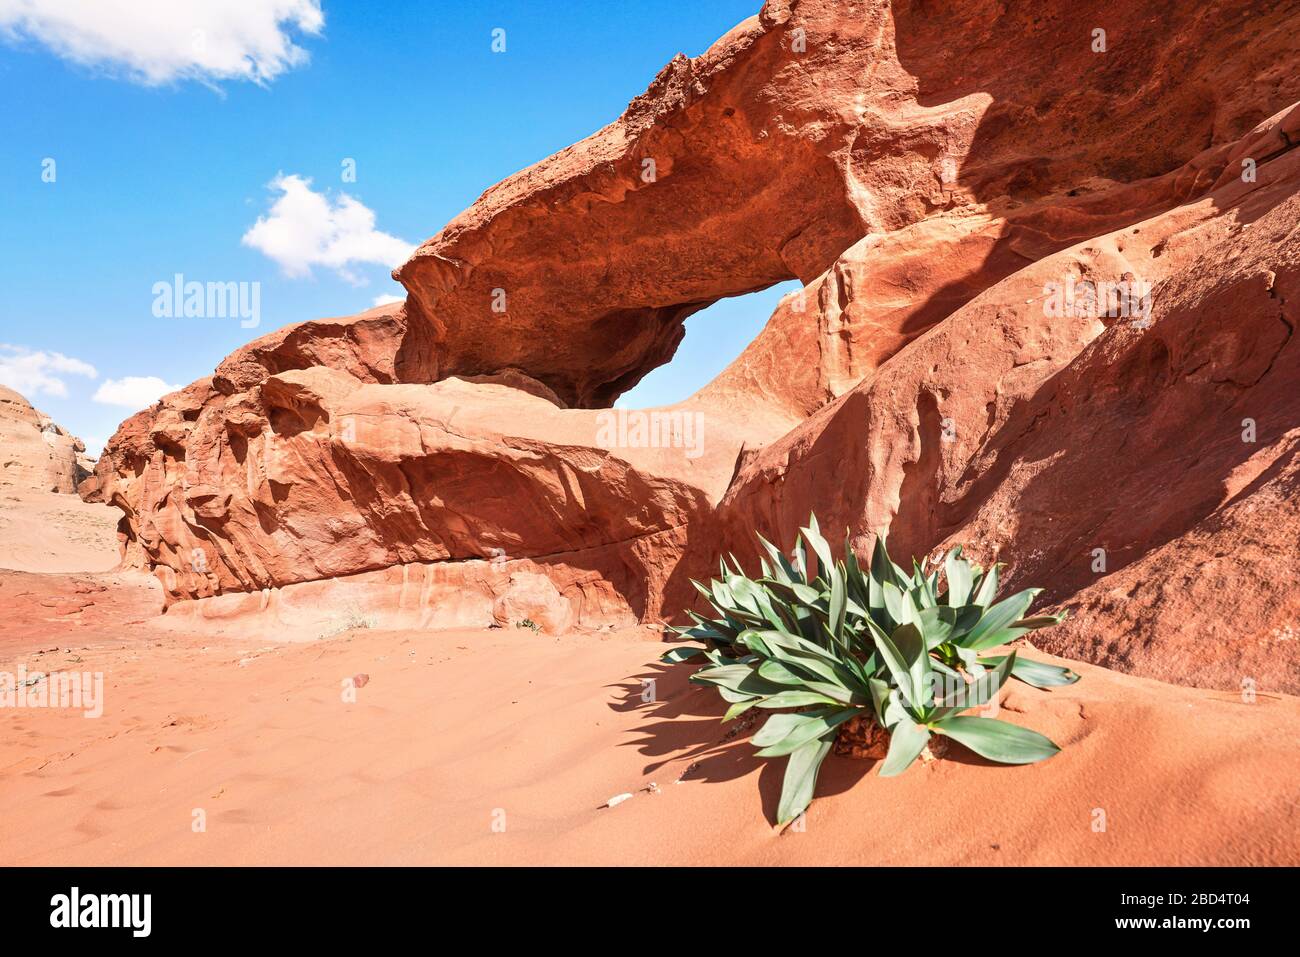 Little arc or small rock window formation in Wadi Rum desert, bright sun shines on red dust and rocks, Sea squill plant Drimia maritima in foreground Stock Photo